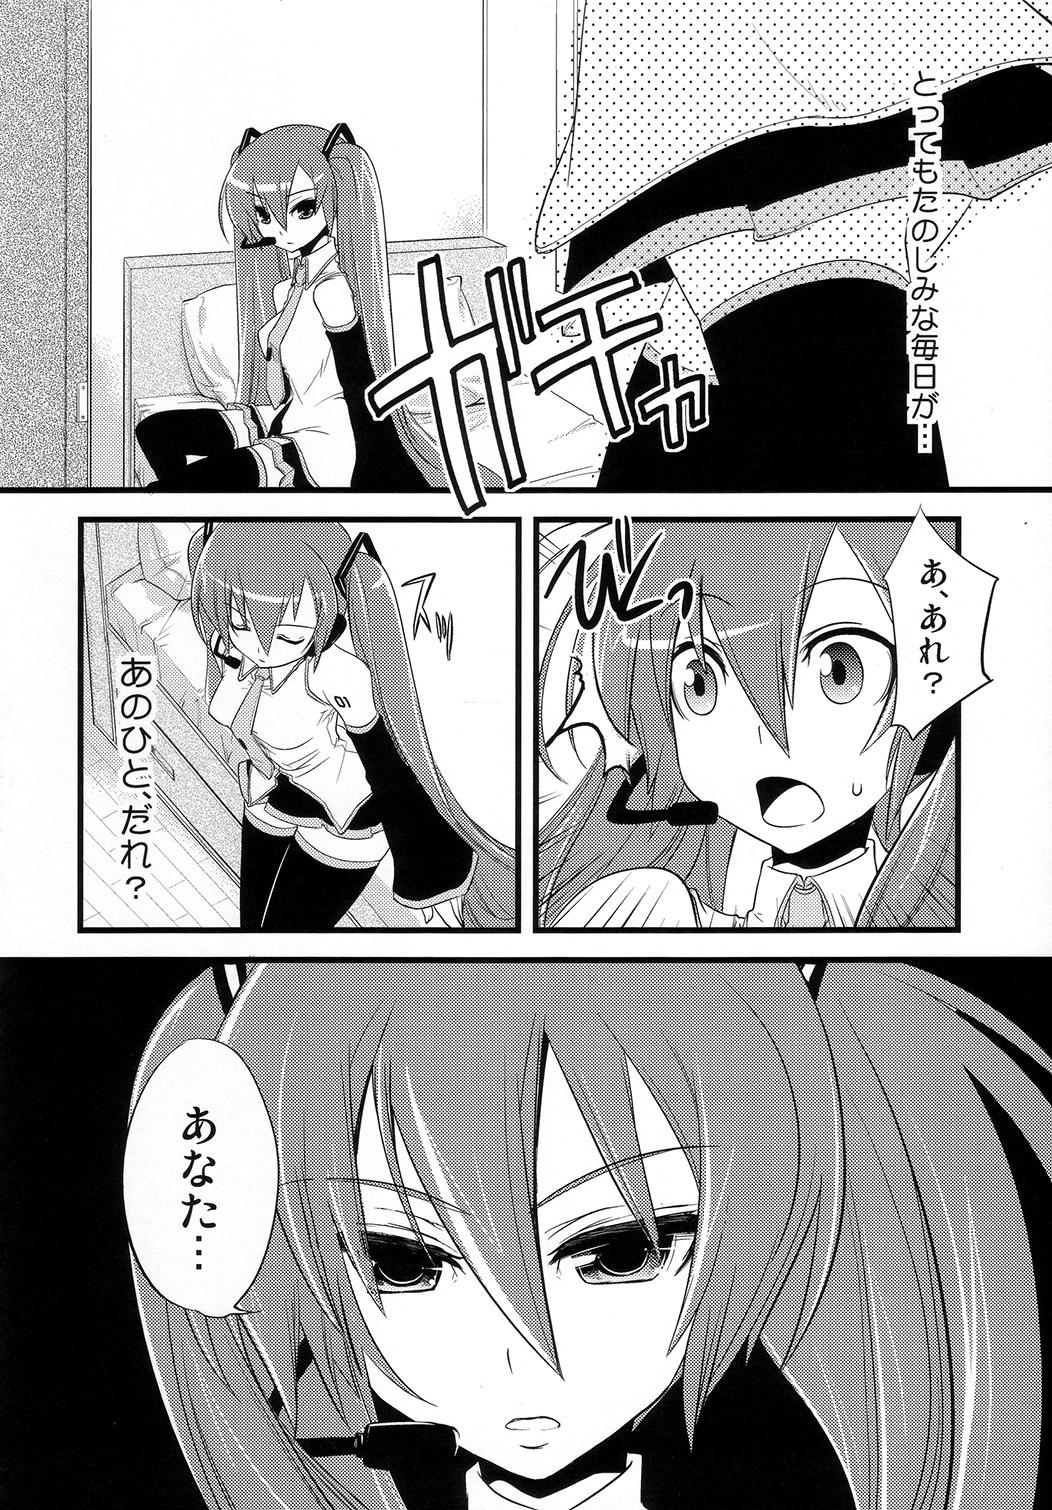 Kiss Install/Uninstall - Vocaloid Asiansex - Page 7